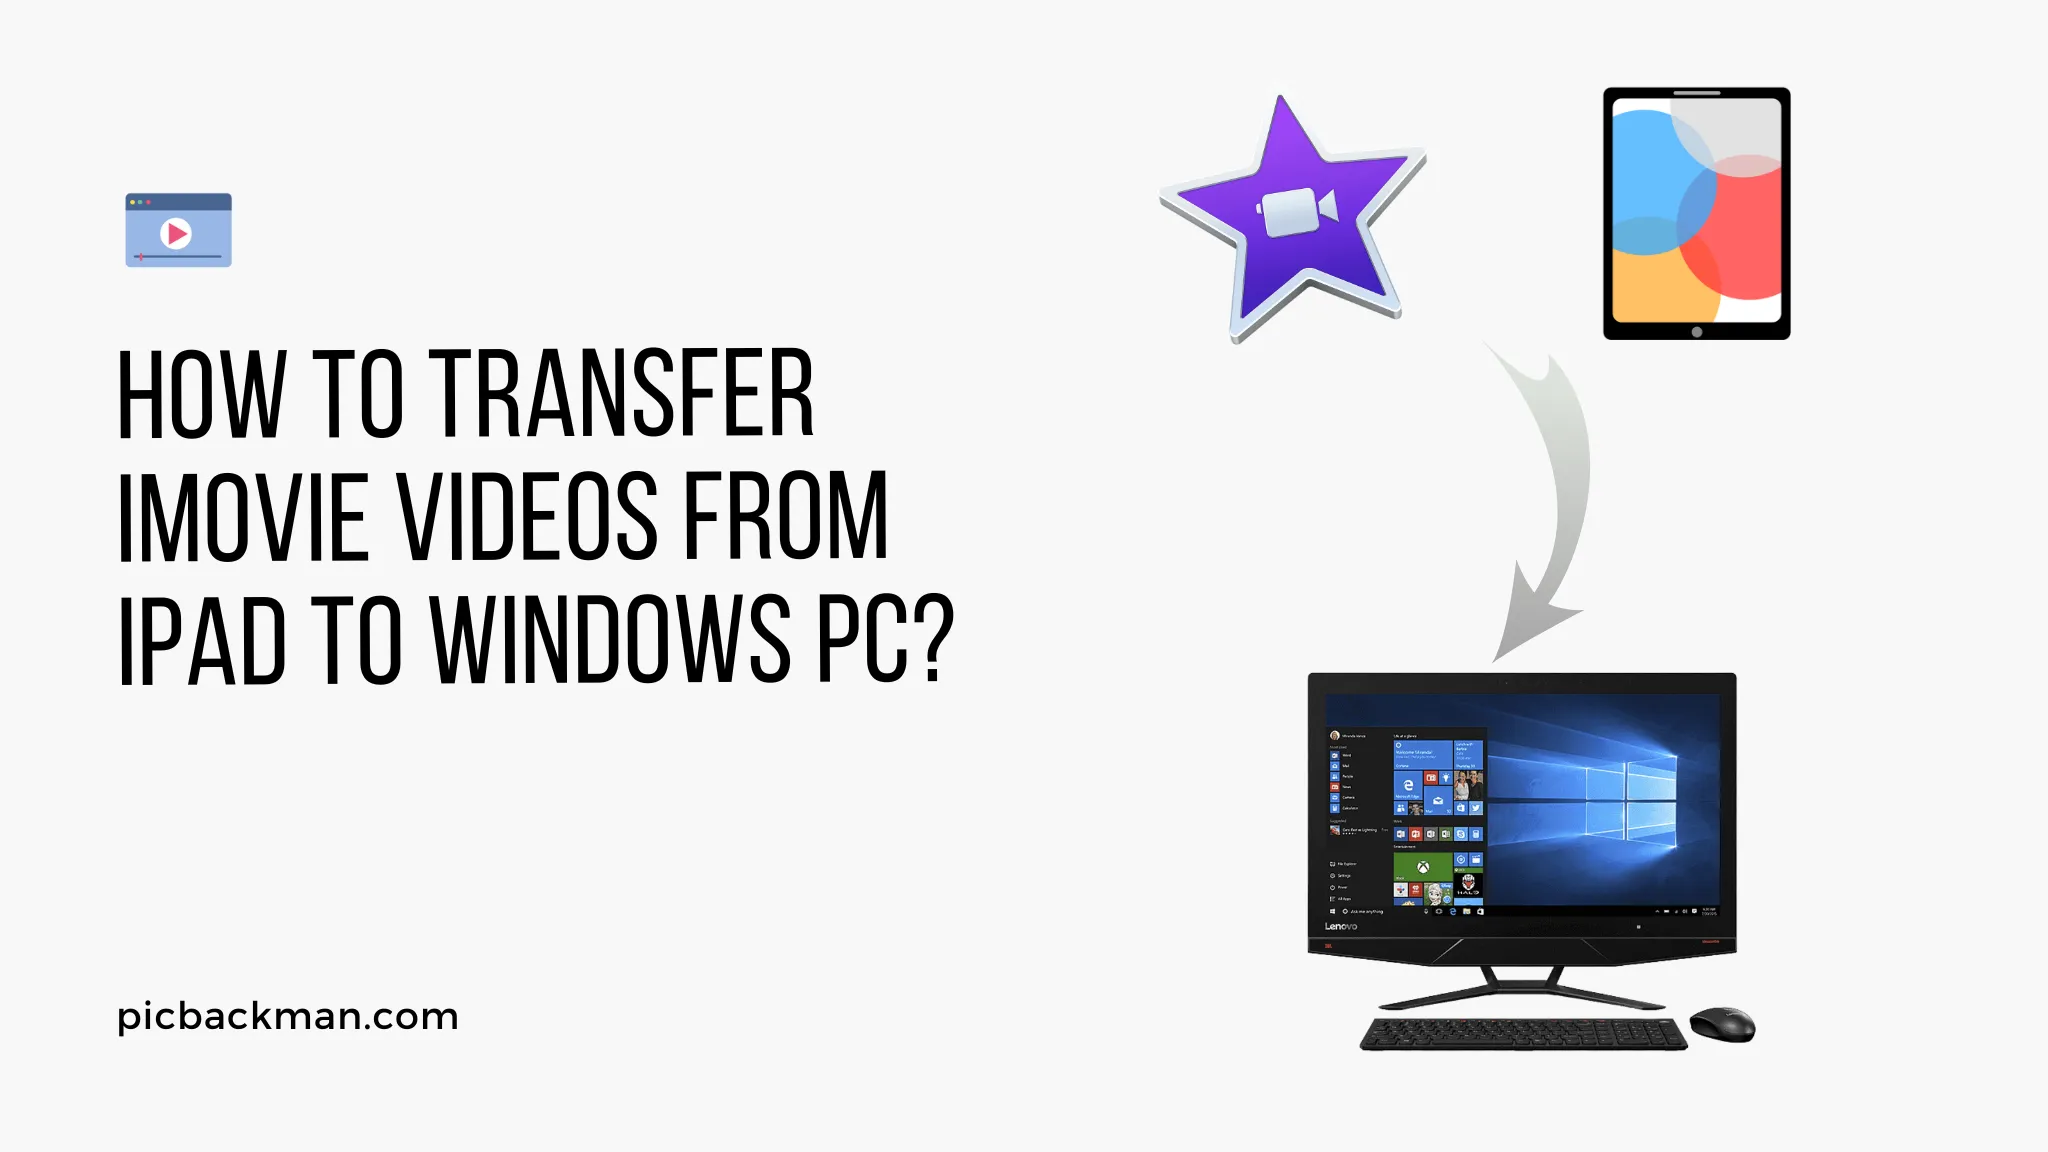 How to Transfer iMovie Videos from iPad to Windows PC